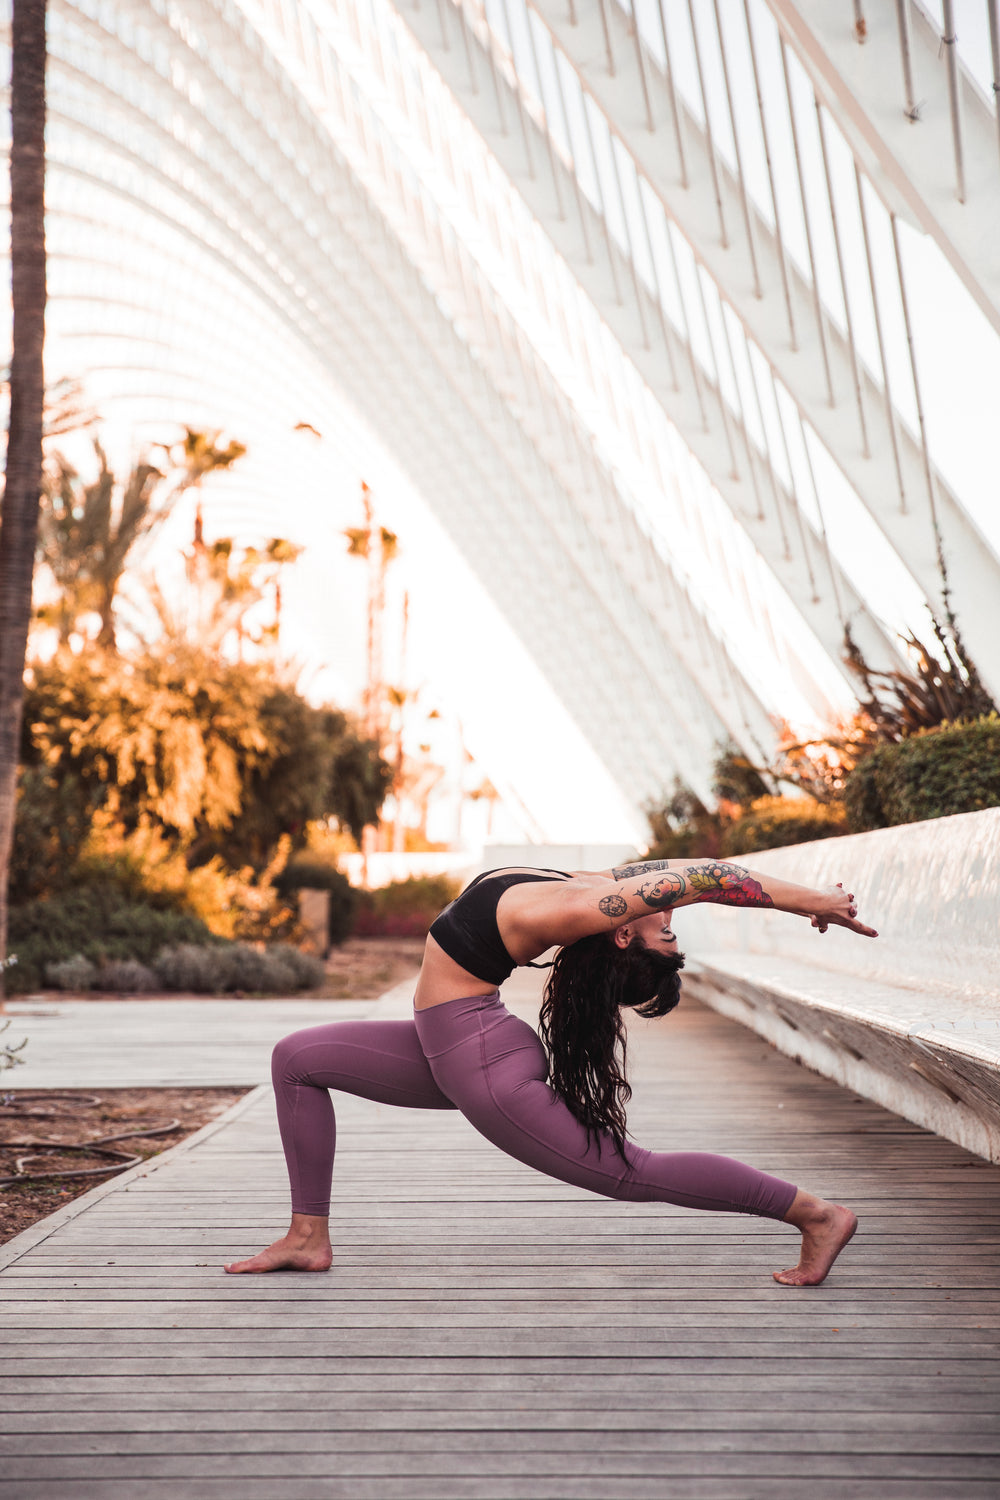 Yoga Images: Download Free Stock Photos of Yogis & Poses